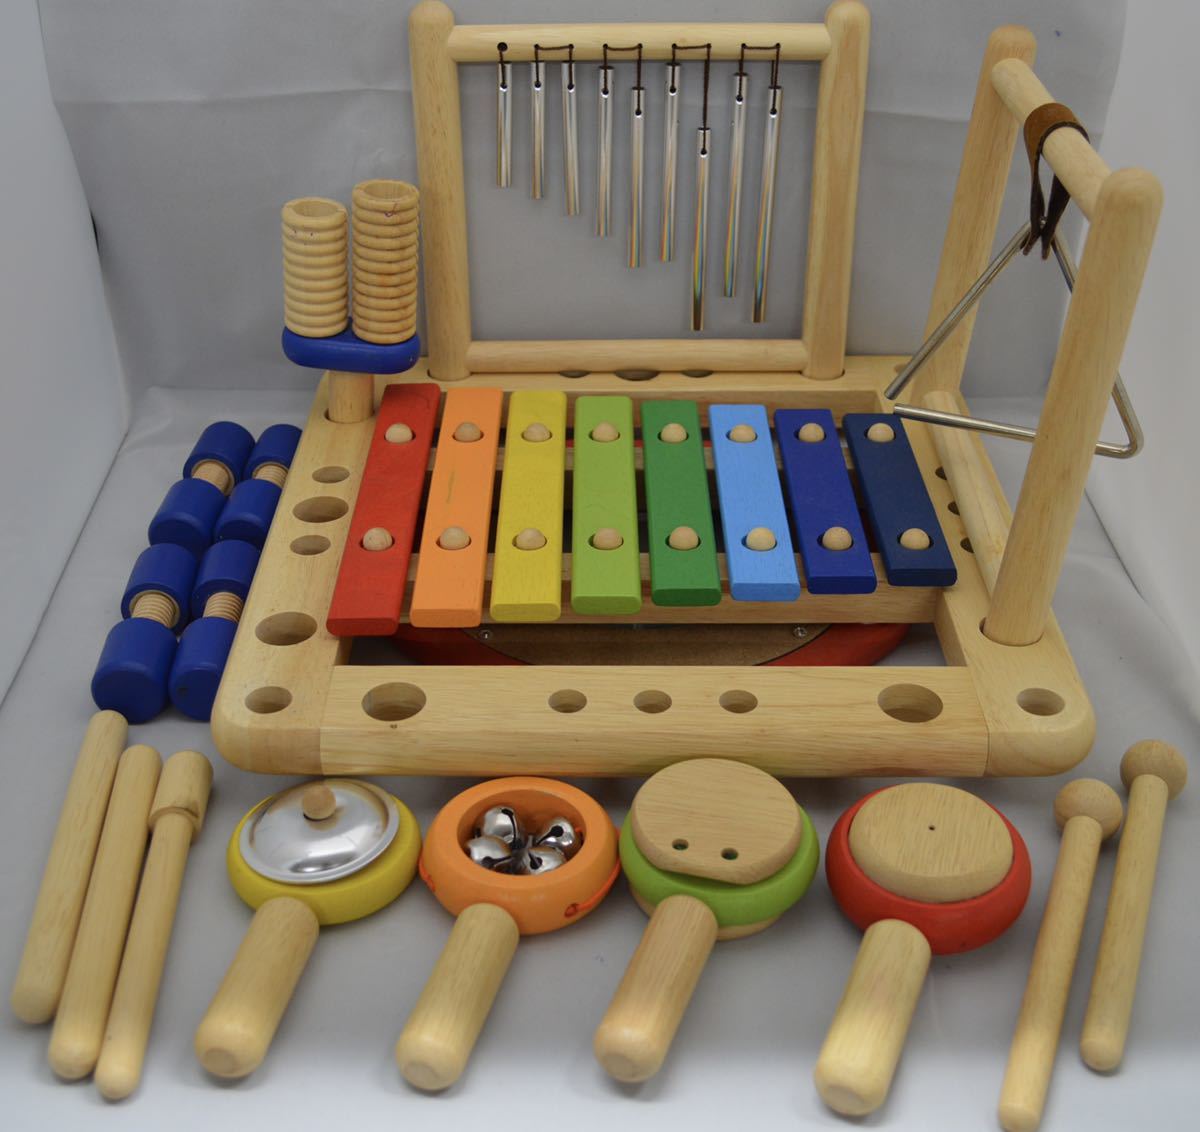 \'mTOY music station baby music musical instruments intellectual training present toy intellectual training toy I m toy wooden toy wooden toy 3 -years old wooden 